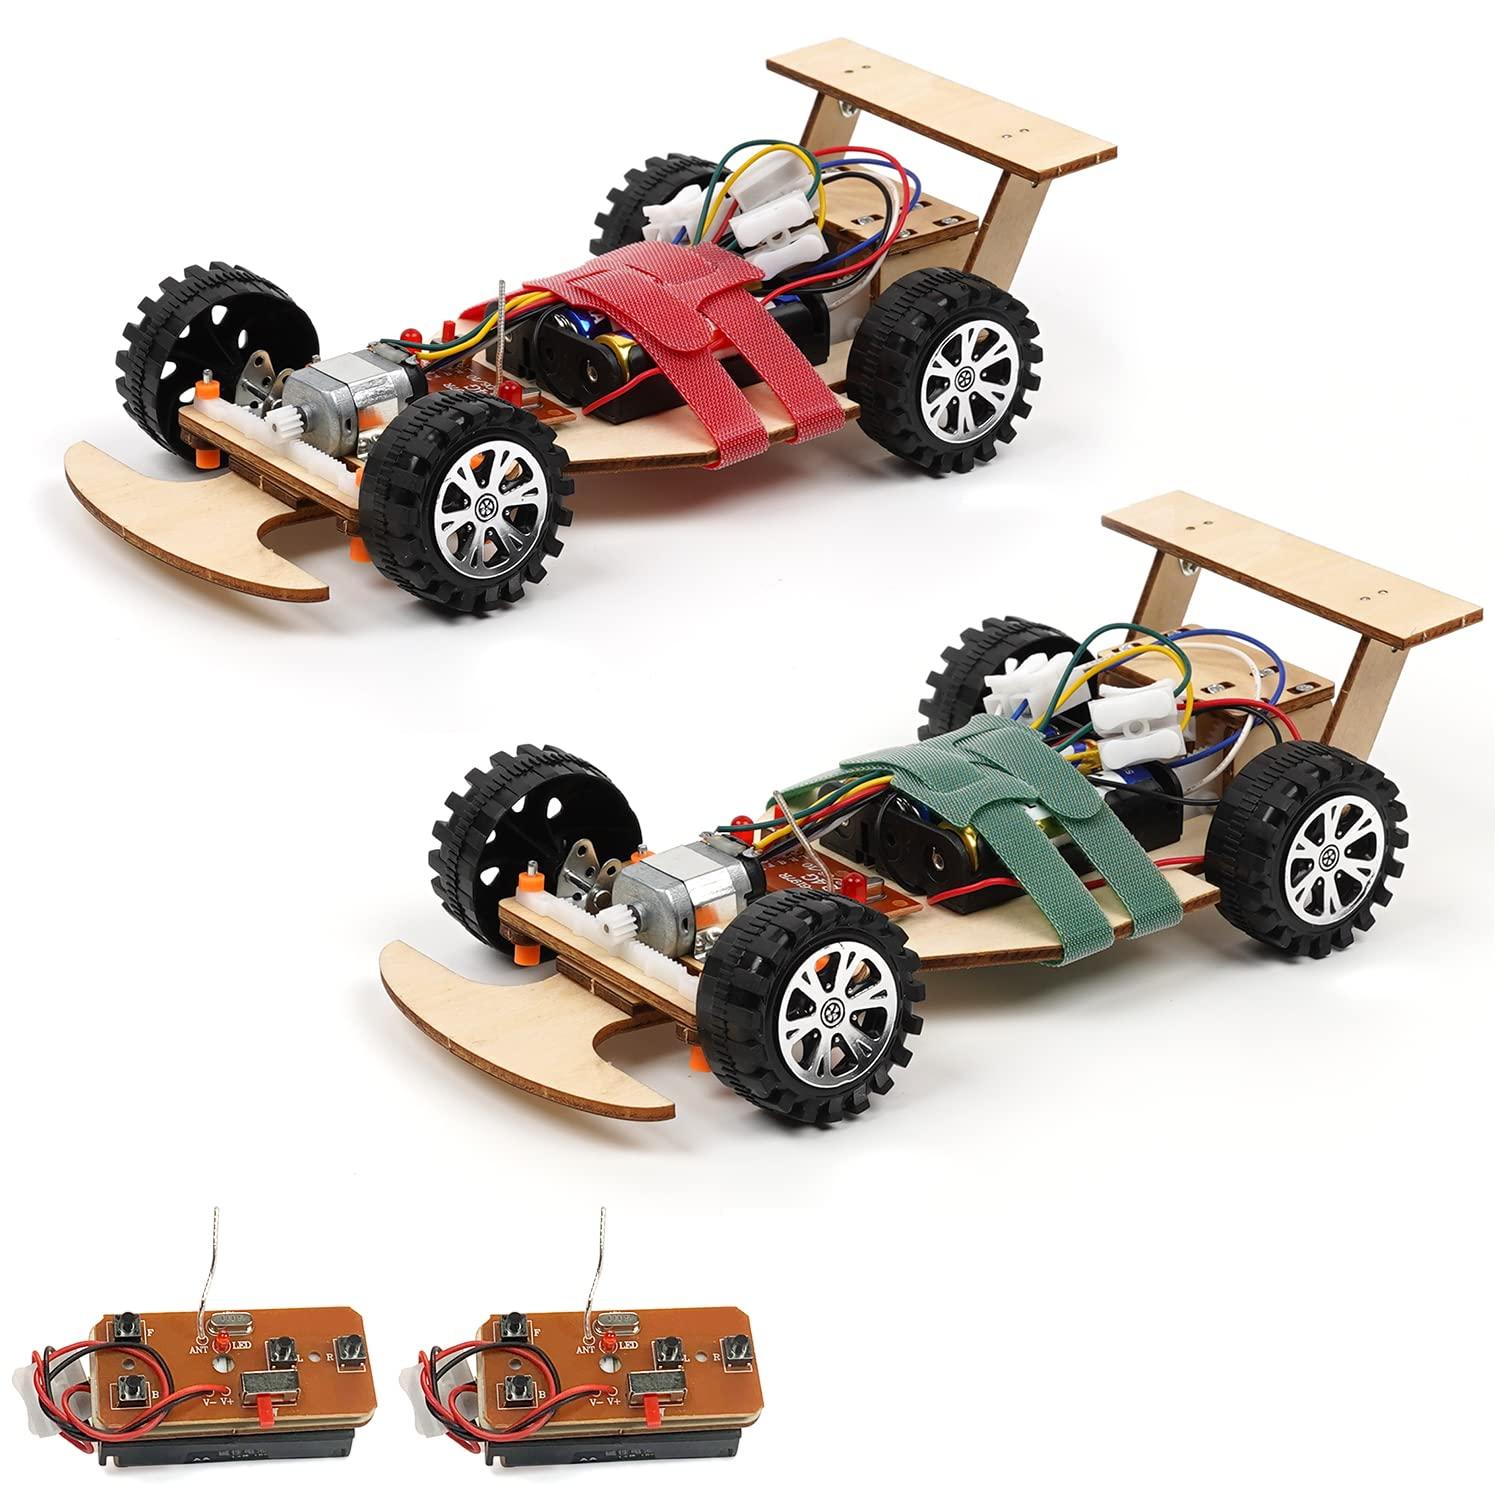 Double Horse Rc: Explore the Wide Range of Double Horse RC Toys for an Authentic Experience!